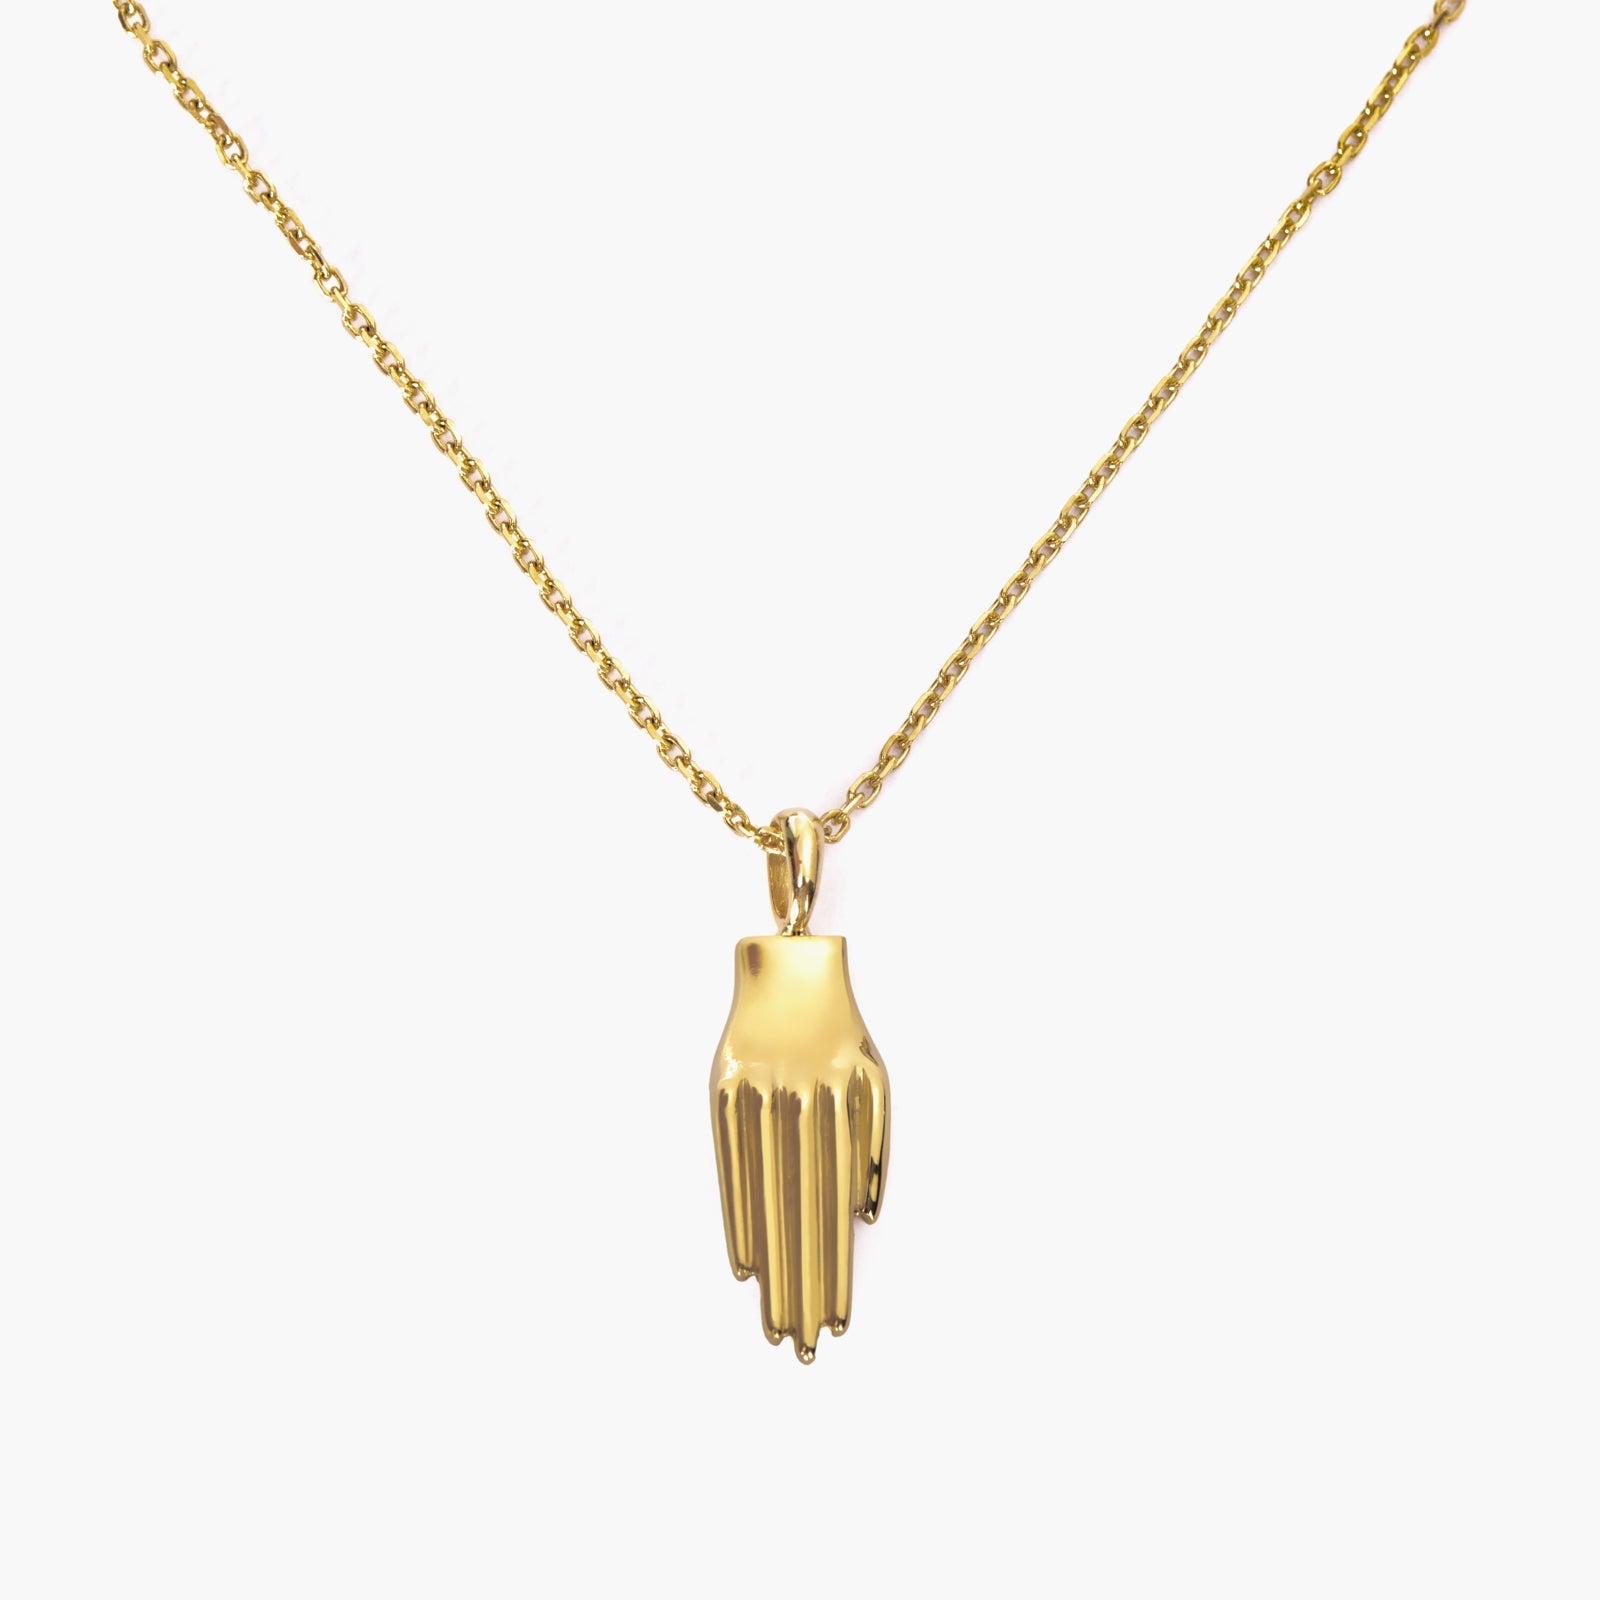 Praying hands necklace, religious necklace, catholic necklace, christian,  gold hands pendant, 14k gold filled chain, protection gift